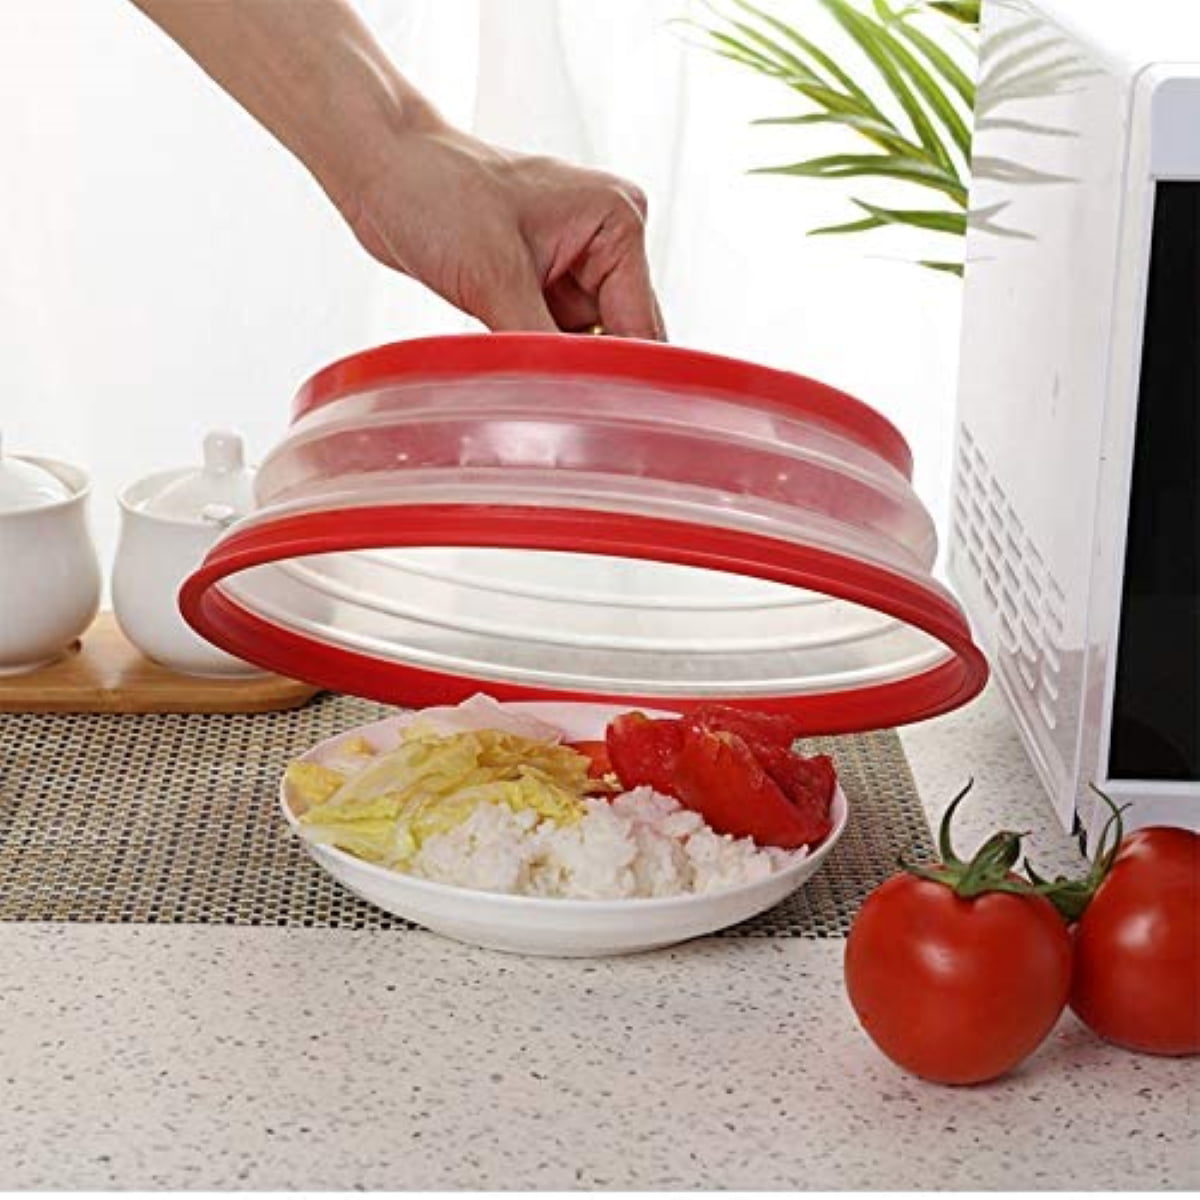 Microwave Plate Cover by Annaklin, Prevents Food Splatter, Collapsible  Microwave Cover for Food, Vented, BPA-Free & Non-Toxic, 10.5 Inch (Red)